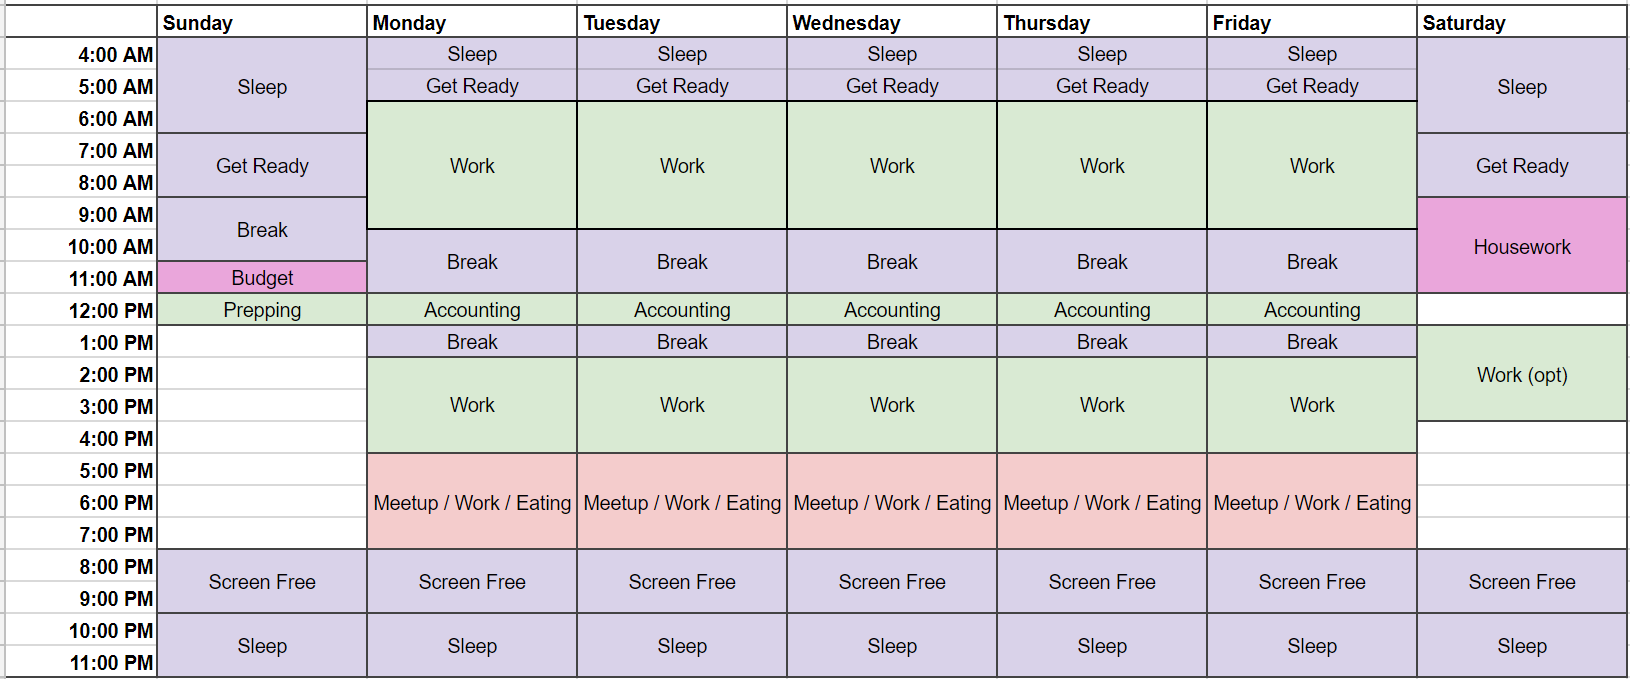 Spreadsheet I use for planning schedule, with columns for each day of the week and rows for each hour of the day.